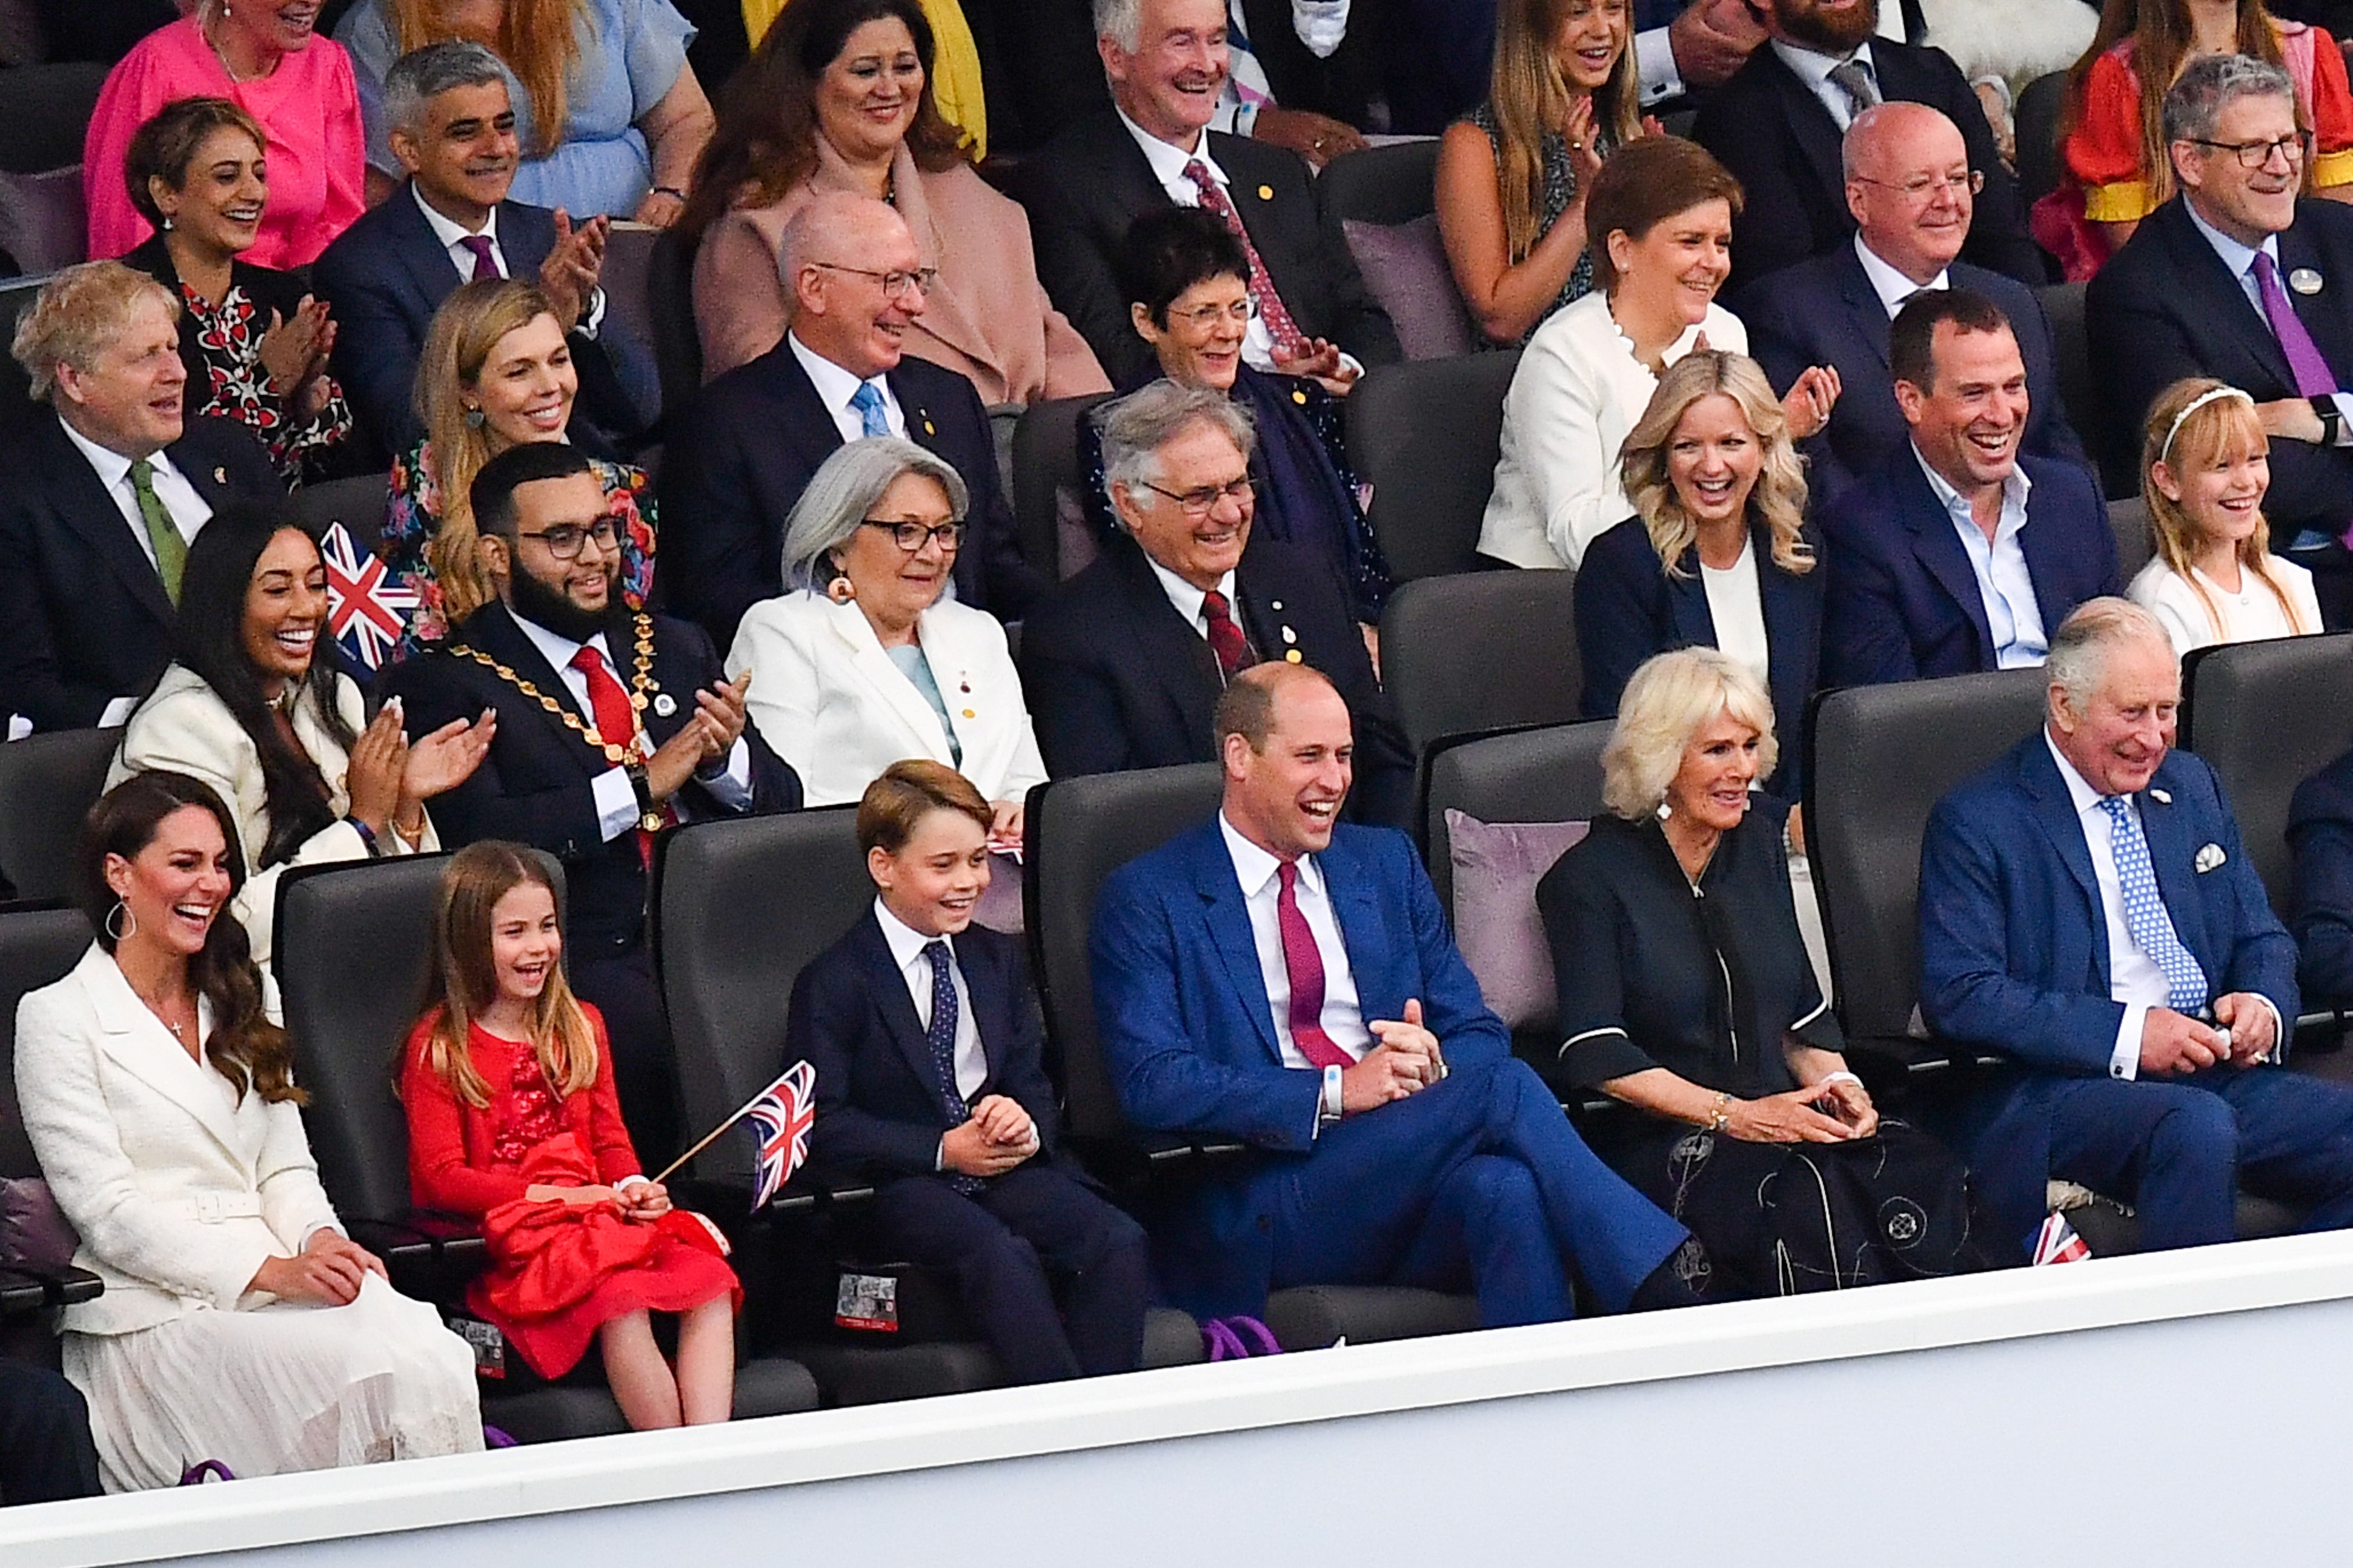 The Duchess of Cambridge, Princess Charlotte, Prince George, the Duke of Cambridge, the Duchess of Cornwall, the Prince of Wales , the Princess Royal, Vice Admiral Sir Tim Laurence and the Countess of Wessex in the royal box (Niklas Halle’n/PA)